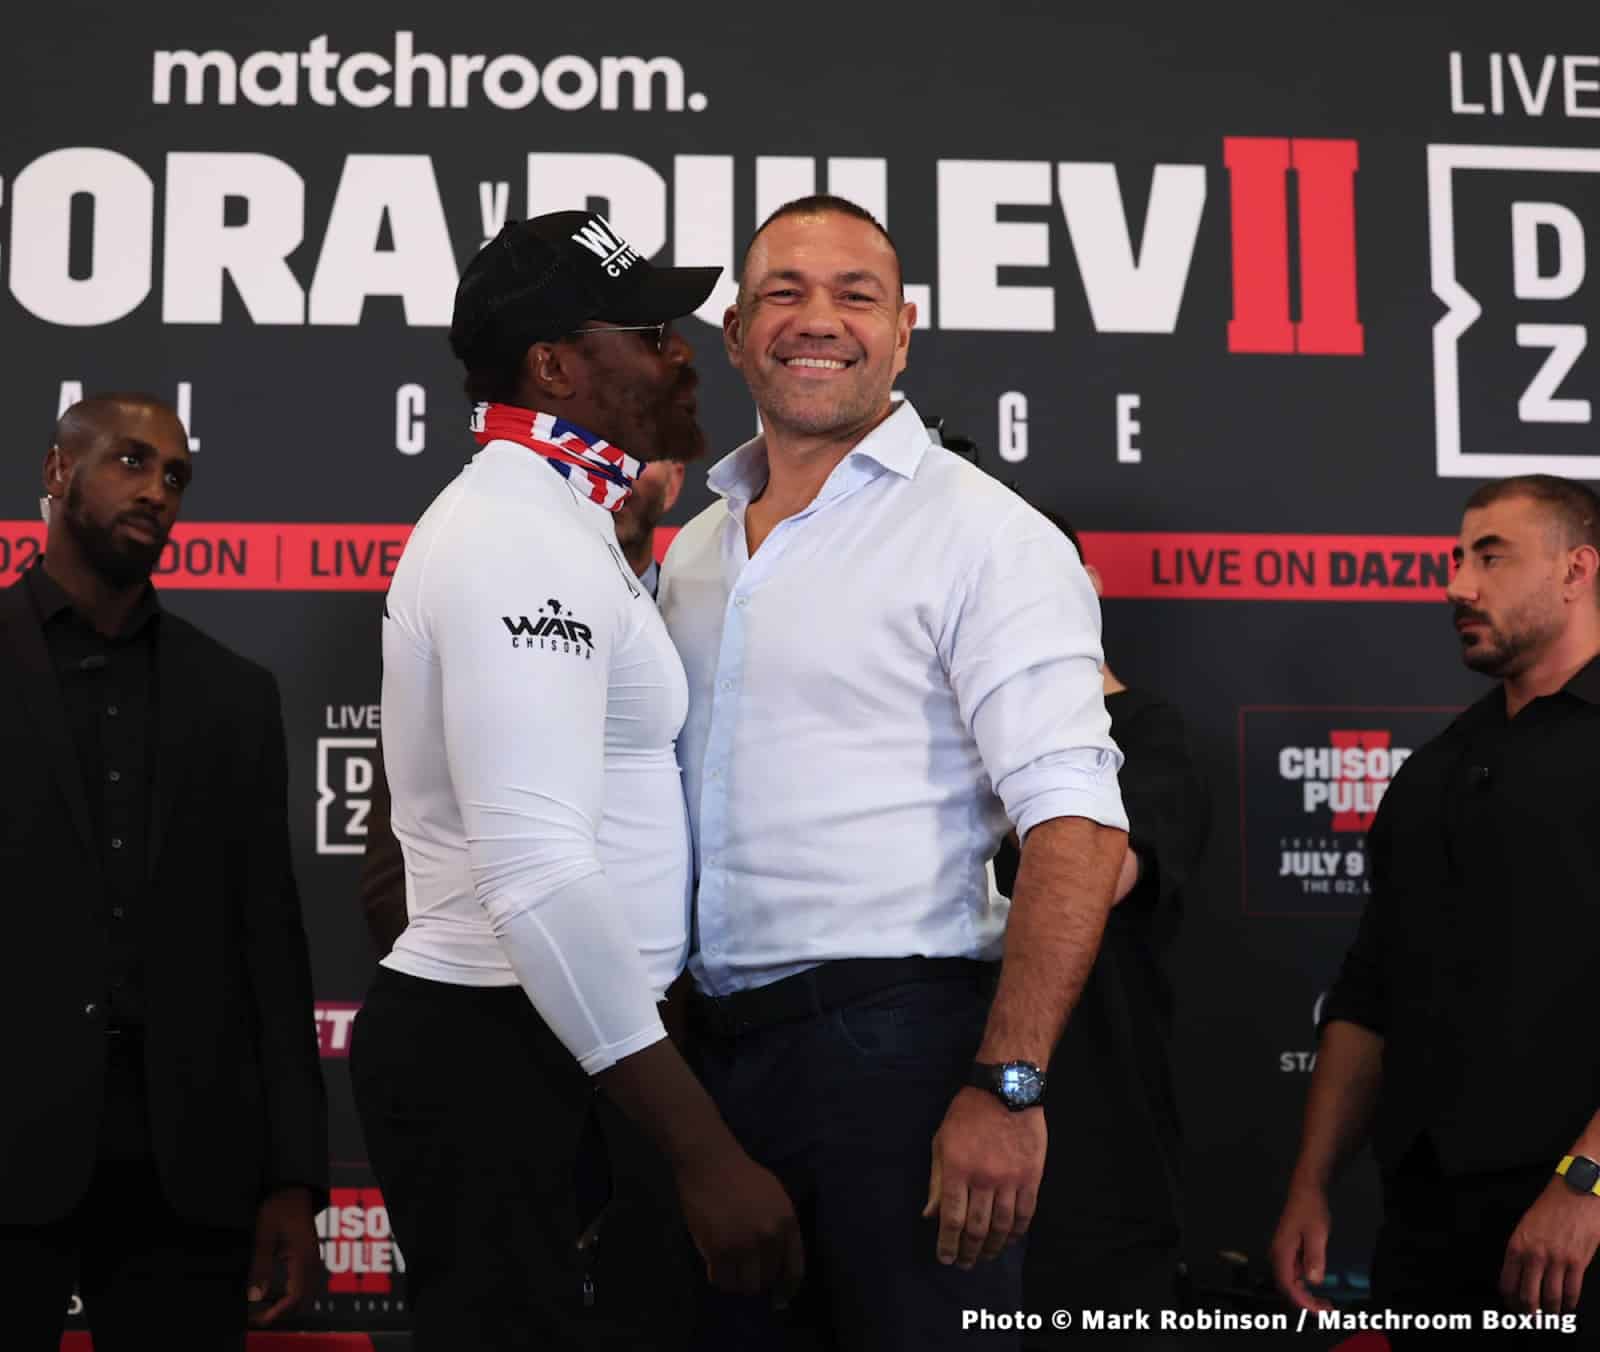 Image: Kubrat Pulev: "He's [Chisora] scared, he knows what's coming"